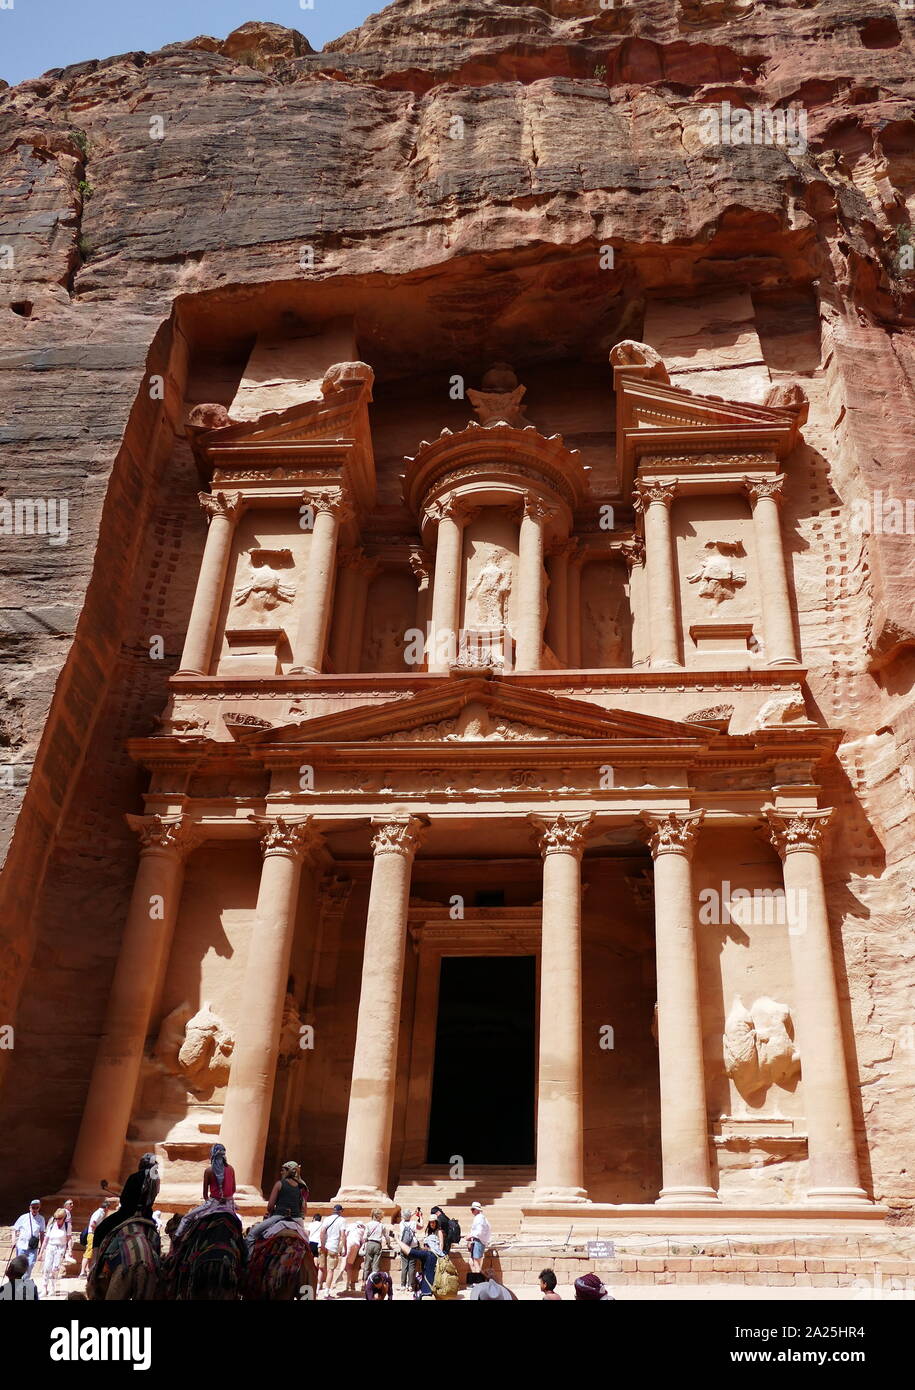 Al-Khazneh (The Treasury) a temple in the ancient Nabatean Kingdom city of Petra, Jordan. The structure was carved out of a rock and is believed to have been mausoleum